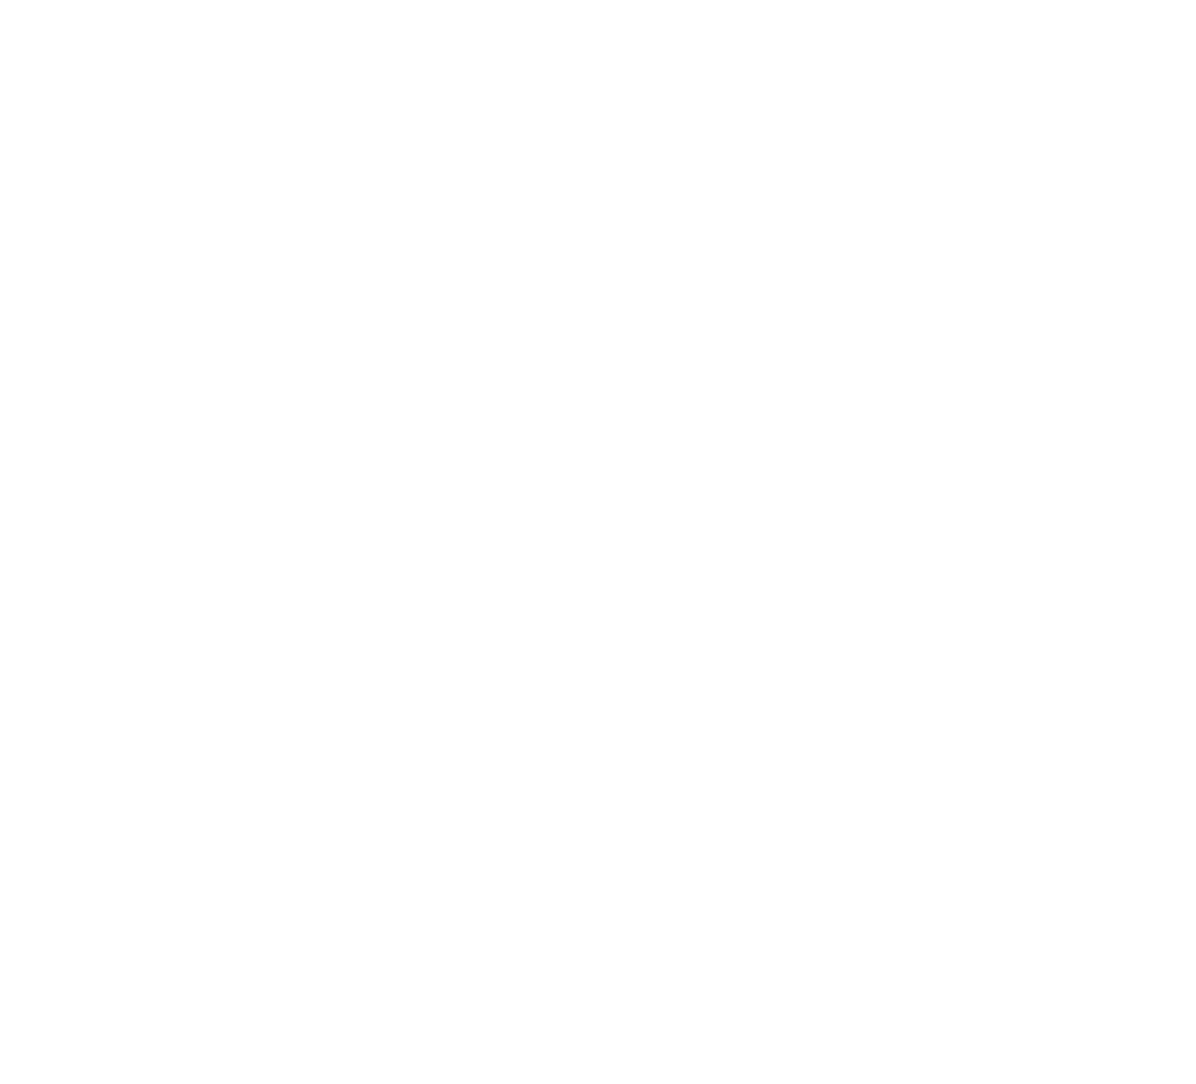 Table Top Pizza